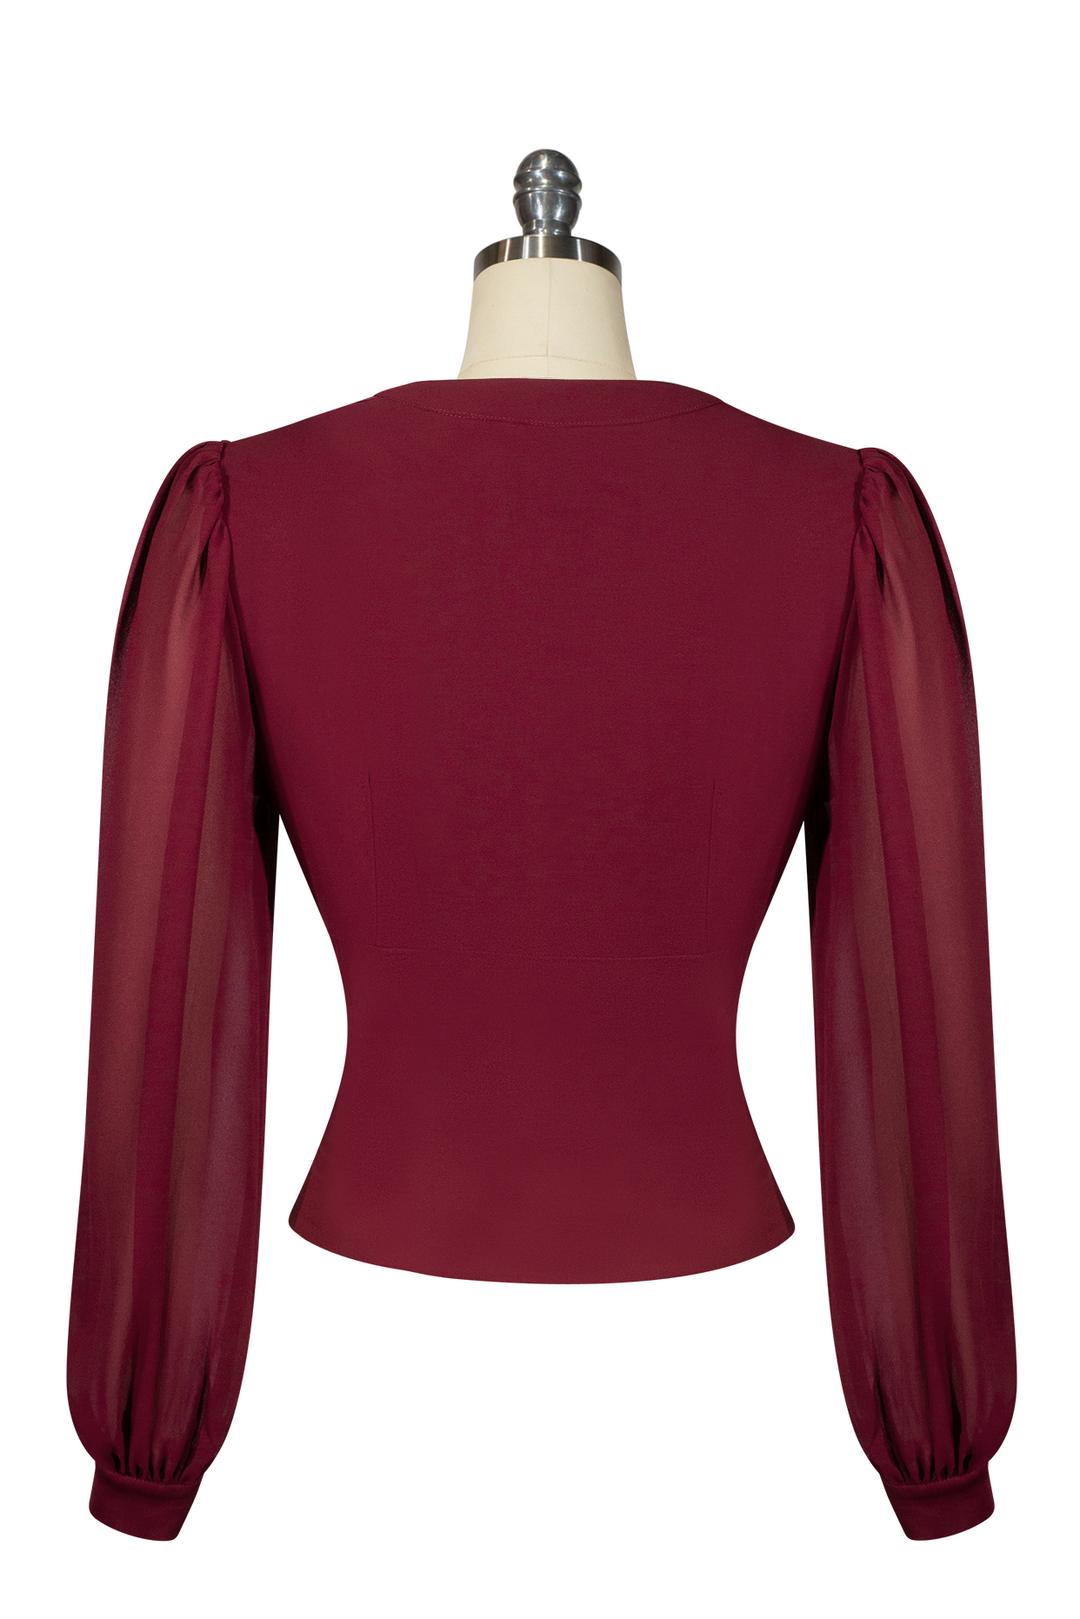 Capone Frill Front Blouse (Burgundy) - Kitten D'Amour